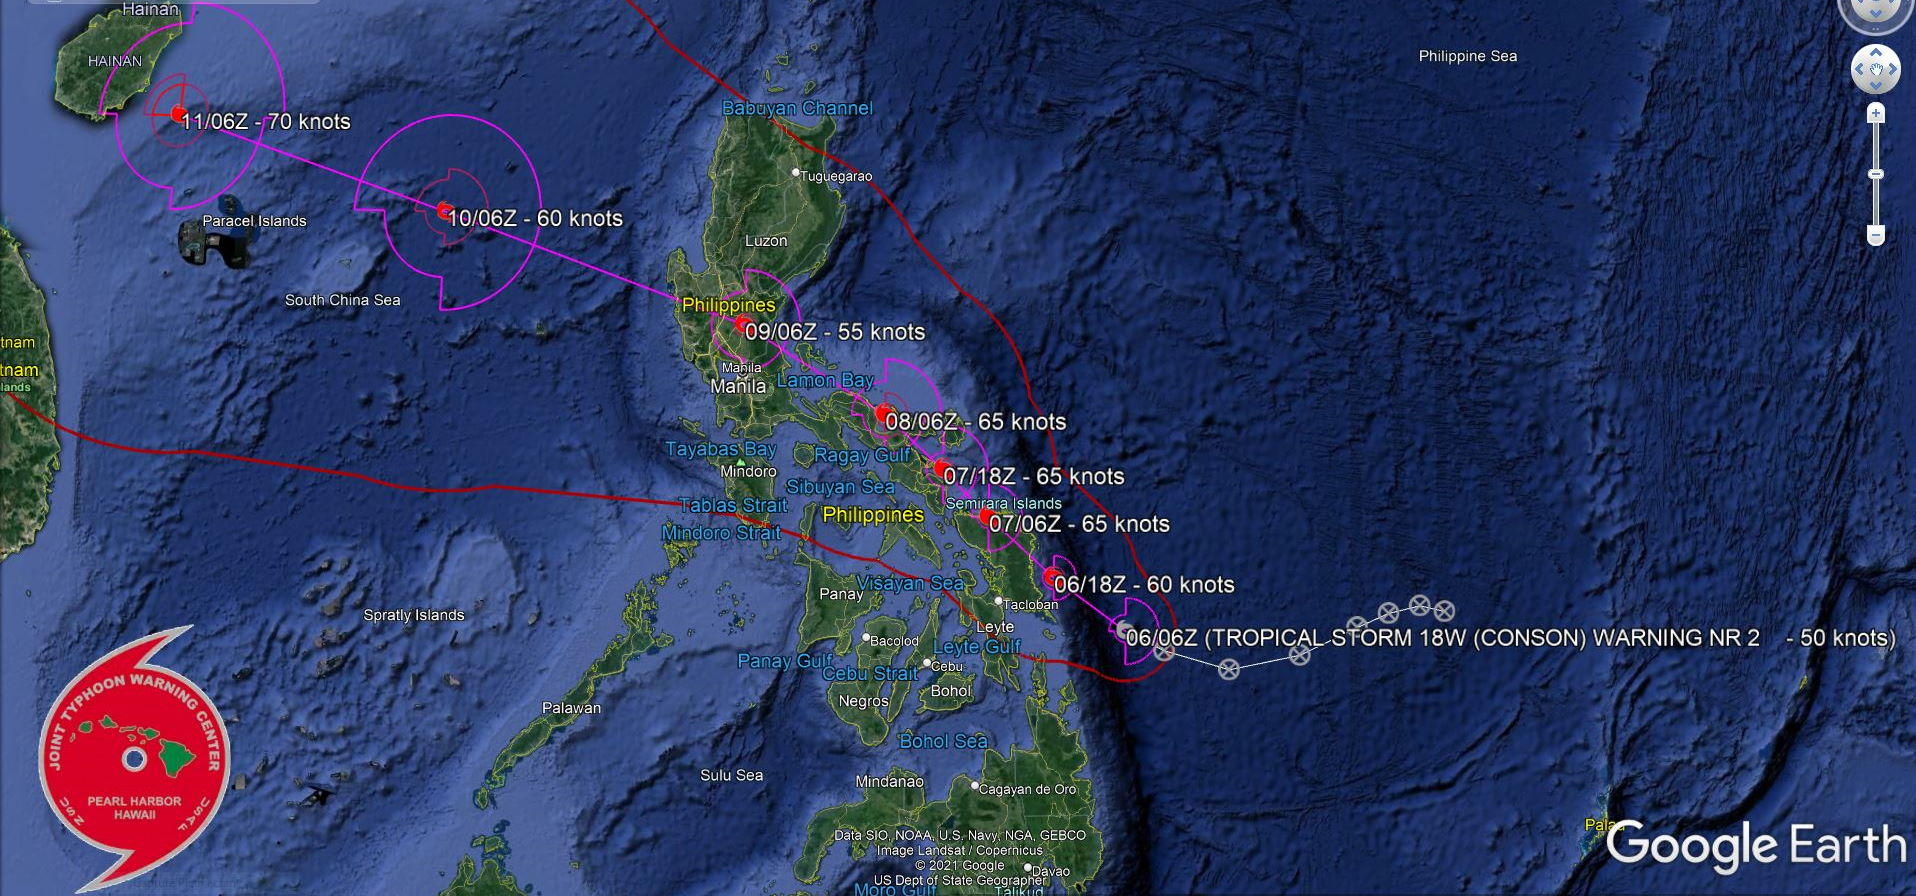 TS 18W(CONSON). WARNING 2 ISSUED AT 06/09UTC.SIGNIFICANT FORECAST CHANGES: CURRENT INTENSITY AND FORECAST INTENSITY HAVE BEEN SIGNIFICANTLY INCREASED FROM PREVIOUS WARNING.  FORECAST DISCUSSION: TS 18W IS FORECAST TO CONTINUE NORTHWESTWARD ON ITS CURRENT TRACK, SKIRTING ALONG THE EASTERN PORTION OF THE PHILIPPINES AND THEN EVENTUALLY CROSSING LUZON 70 KM NORTH OF MANILA AROUND 72H. AFTERWARDS, IT WILL REEMERGE OVER WATER, HEADING WEST-NORTHWESTWARD TOWARDS HAINAN. THE SYSTEM IS EXPECTED TO REACH AN INTENSITY OF 65 KNOTS/CAT 1 BY 24H, AT WHICH TIME LAND INTERACTION WILL SLOW INTENSIFICATION AND EVENTUALLY DECREASE TO 55 KNOTS AS IT CROSSES LUZON. BY 120H, WARM SEA SURFACE TEMPERATURES AND LOW VERTICAL WIND SHEAR WILL ALLOW TS 18W TO REACH AN INTENSITY OF 70 KNOTS/CAT 1. OF NOTE, TD 19W IS CURRENTLY 1295KM EAST-NORTHEASTWARD OF TS 18W. THIS DISTANCE IS ON THE HIGHER THRESHOLD OF POSSIBLE BINARY INTERACTION BETWEEN THE SYSTEMS AND THE CURRENT FORECAST DOES NOT PREDICT ANY INTERACTION, AS THE CURRENT FORECAST TRACKS MAINTAIN ABOUT 1300 KM SEPARATION UP TO 72H, AT WHICH POINT THE DISTANCE BEGINS TO INCREASE.